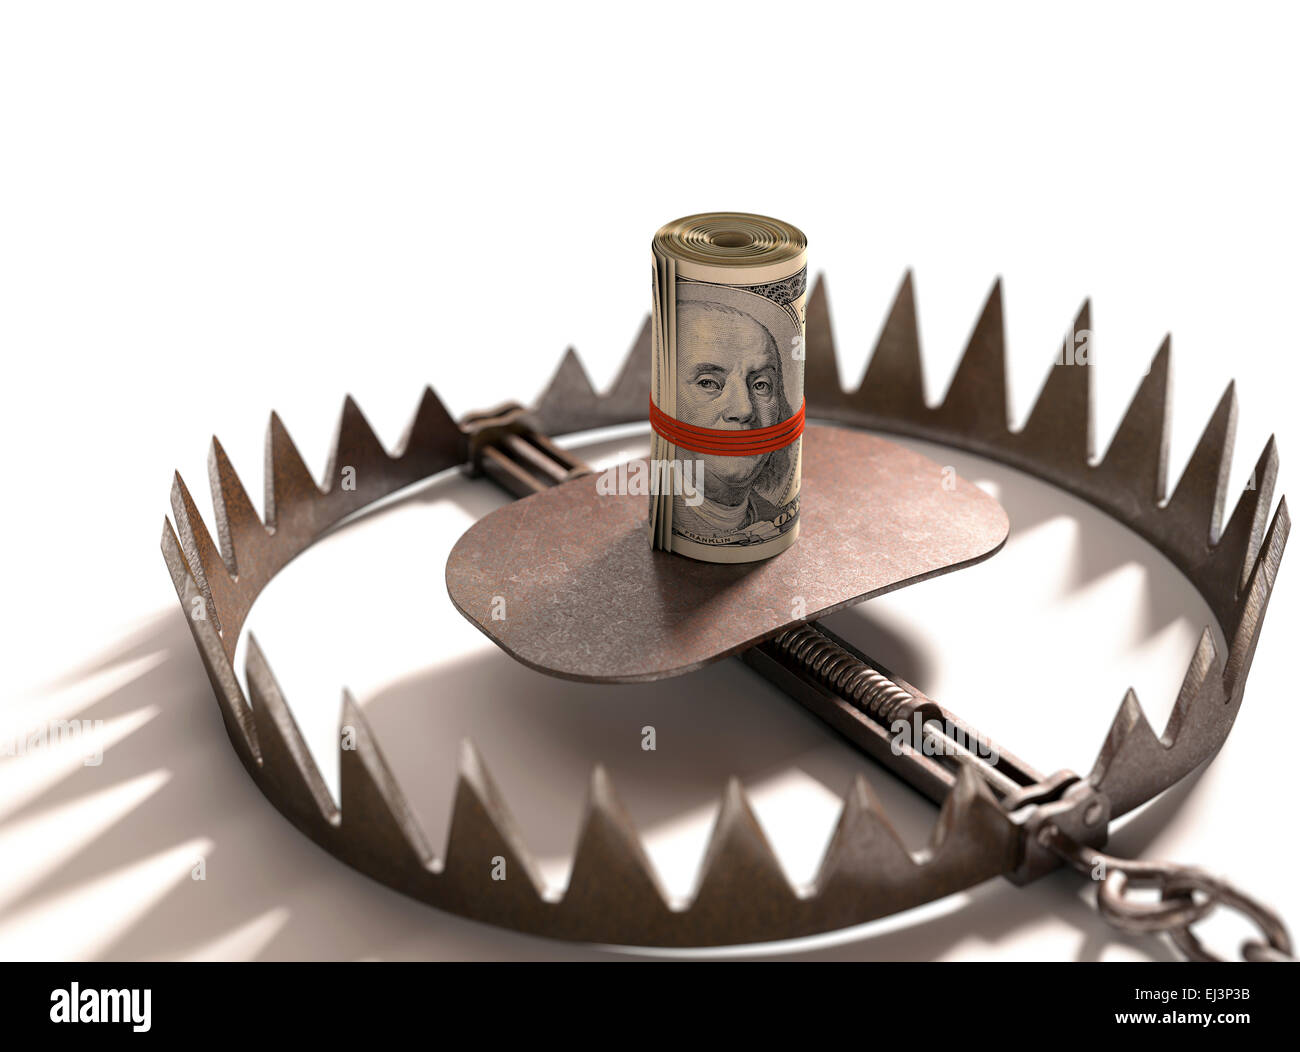 Animal trap with bank notes, illustration Stock Photo